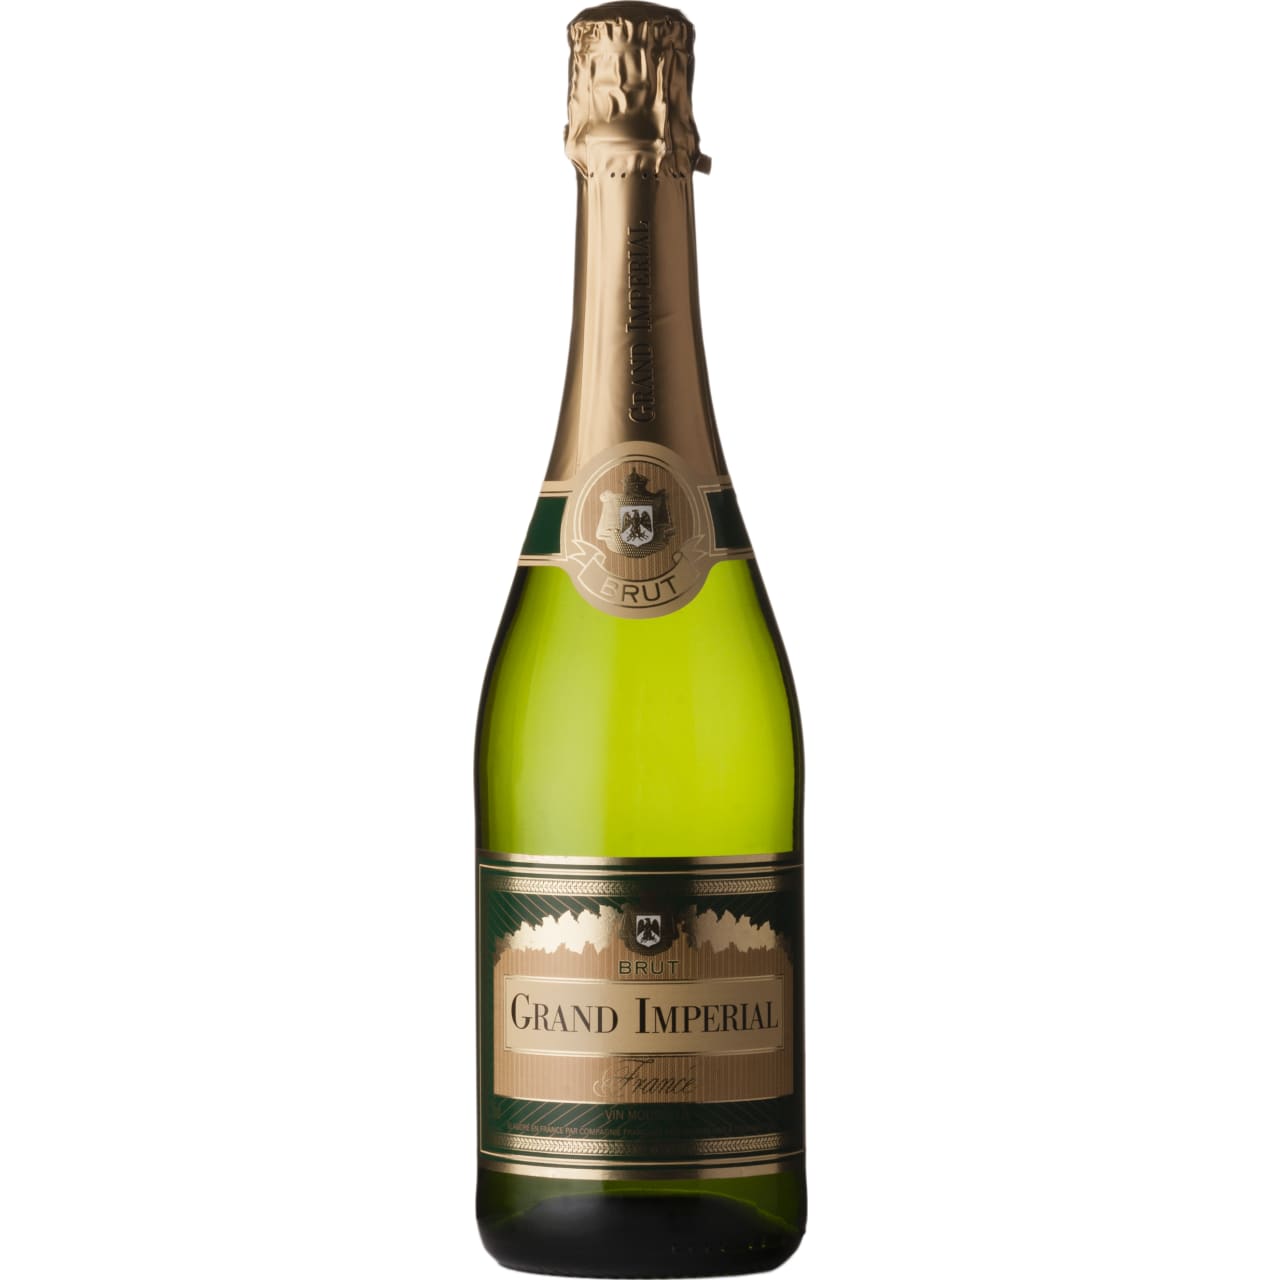 Smooth and clean with a pleasing pear juice character, medium body and dry palate.